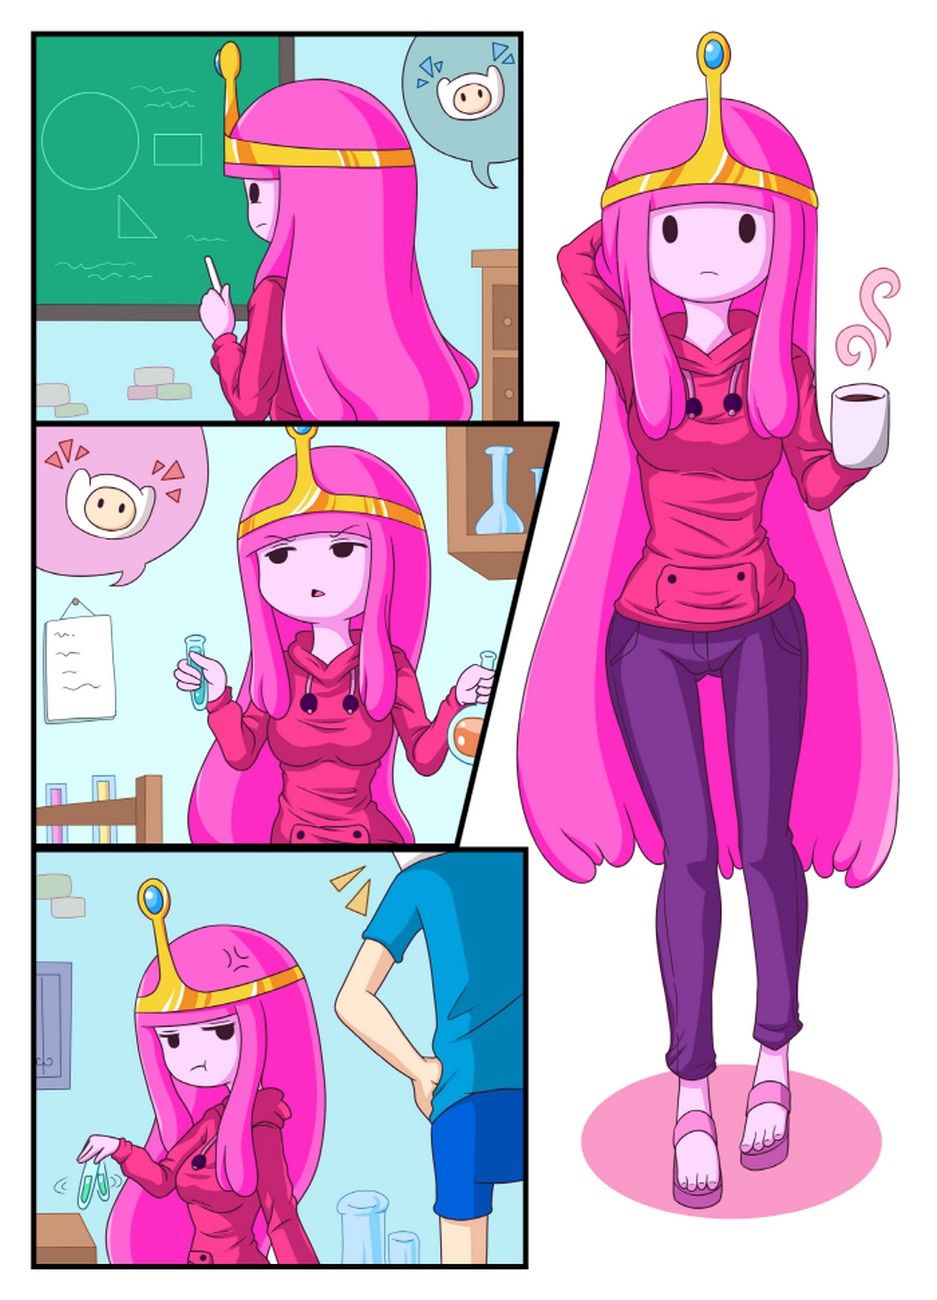 Adventure_Time_-_Adult_Time_1 comix_43388.jpg